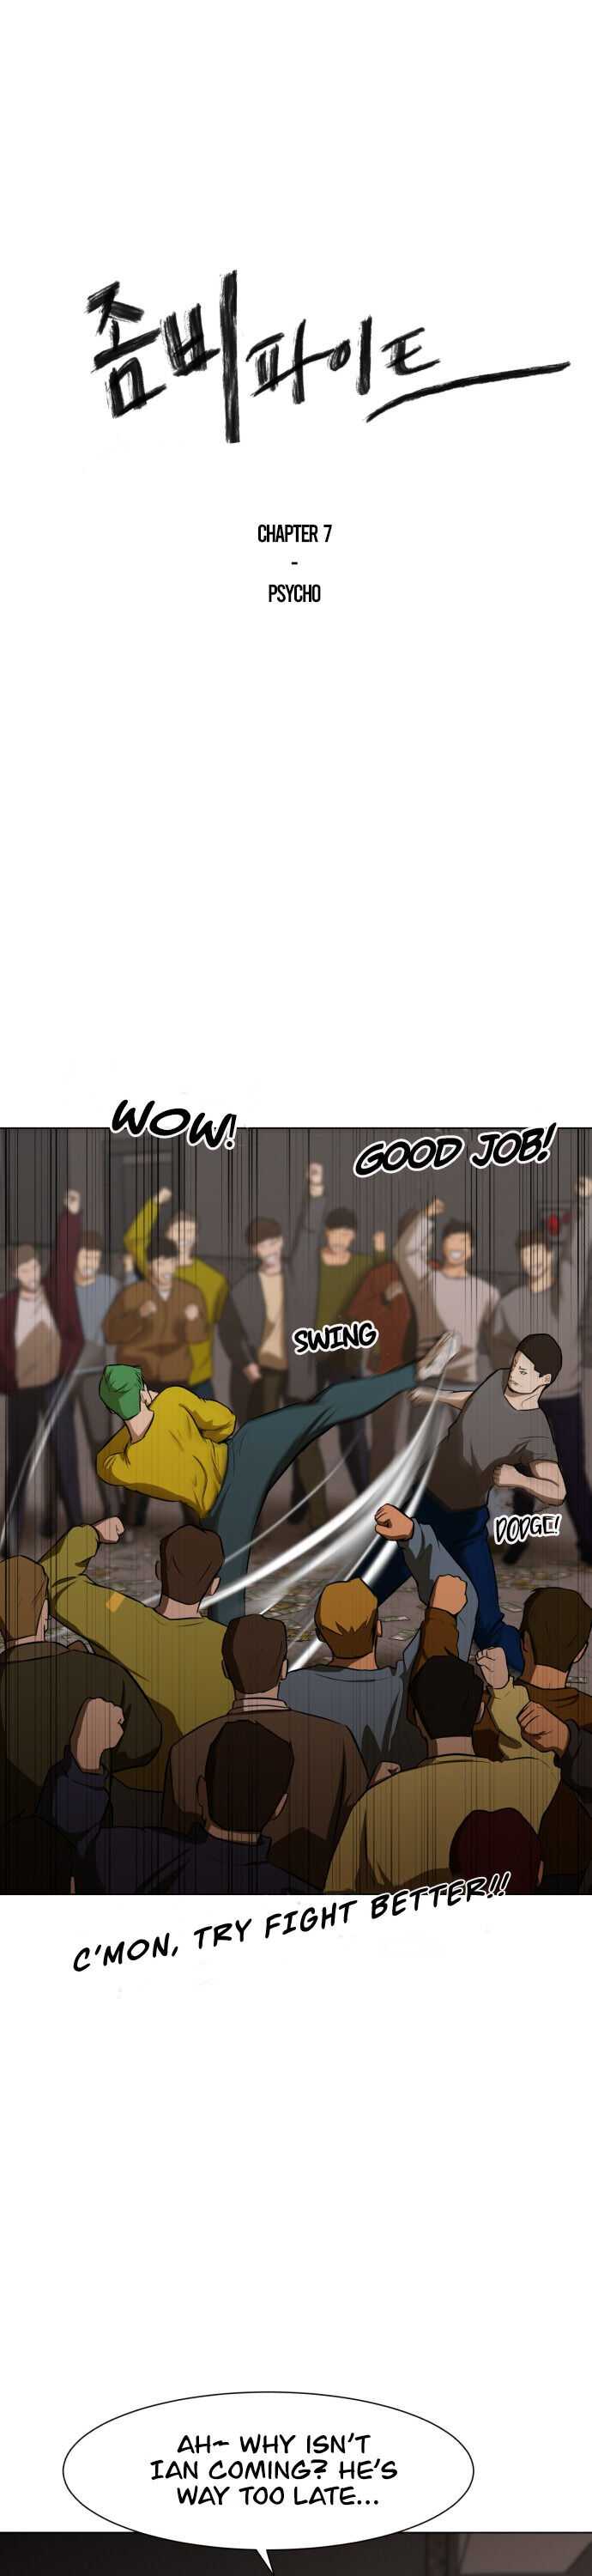 Zombie Fight - Page 2